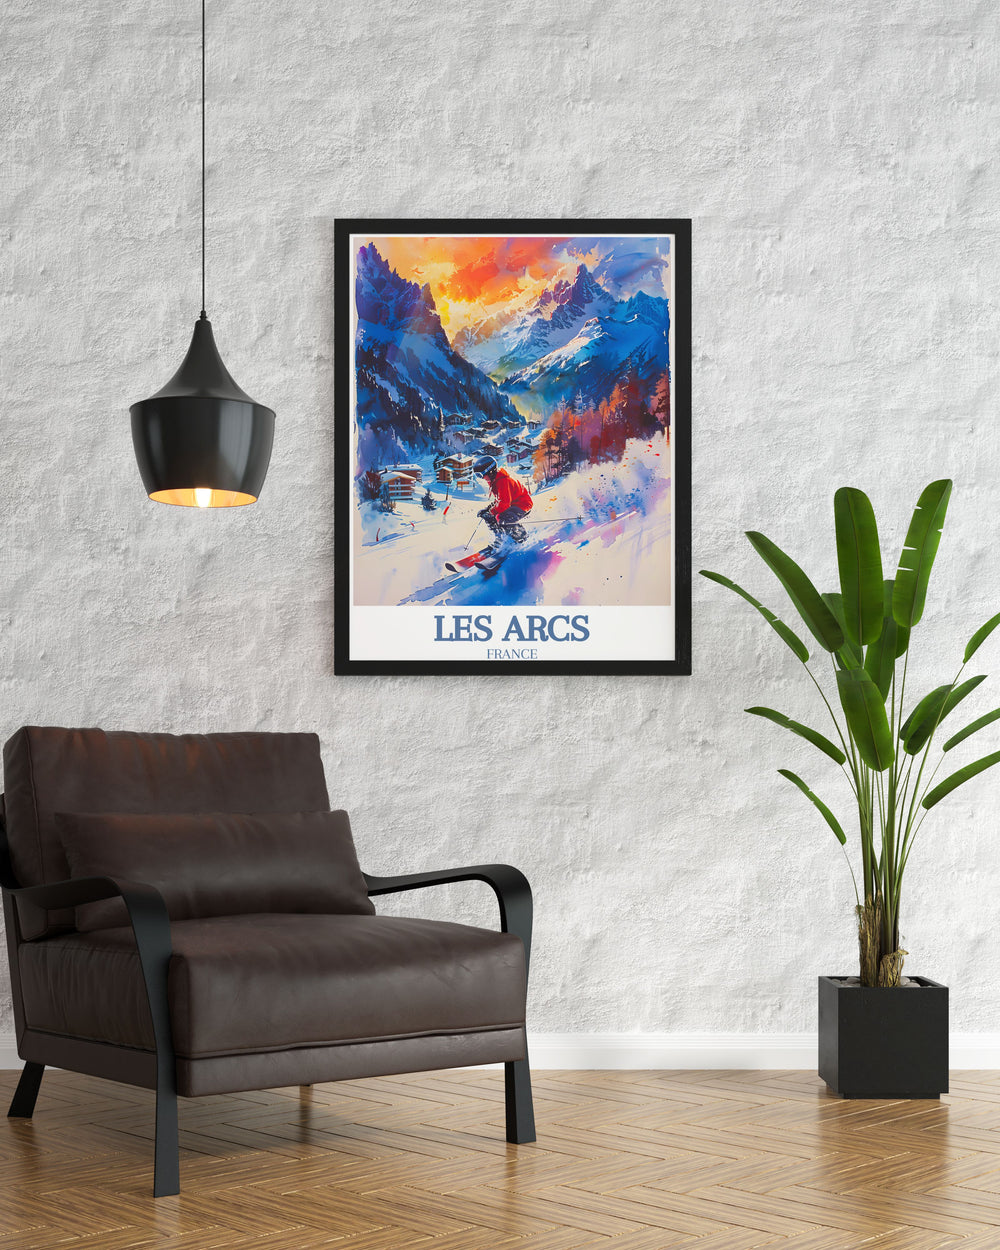 Vintage Ski Print featuring the majestic slopes of Paradiski ski area Mont Blanc and Les Arcs ideal for adding a touch of retro charm to your home decor and celebrating the timeless beauty of the French Alps